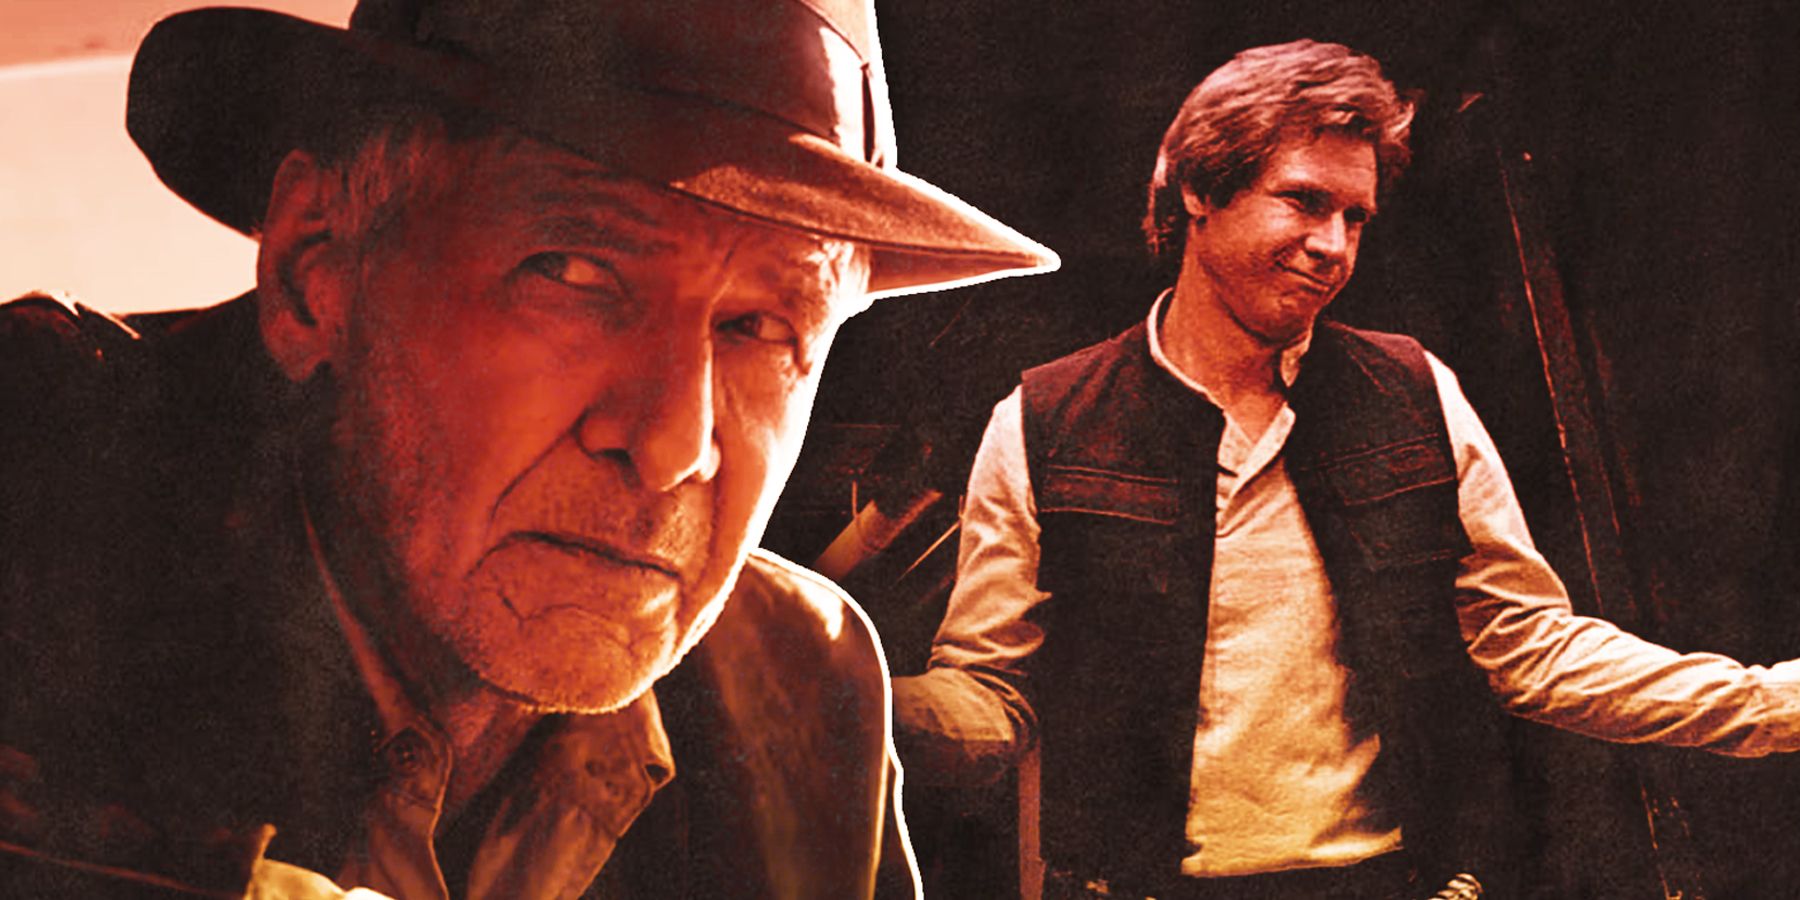 Aged Indiana Jones on the left with young Han Solo shrugging on the right